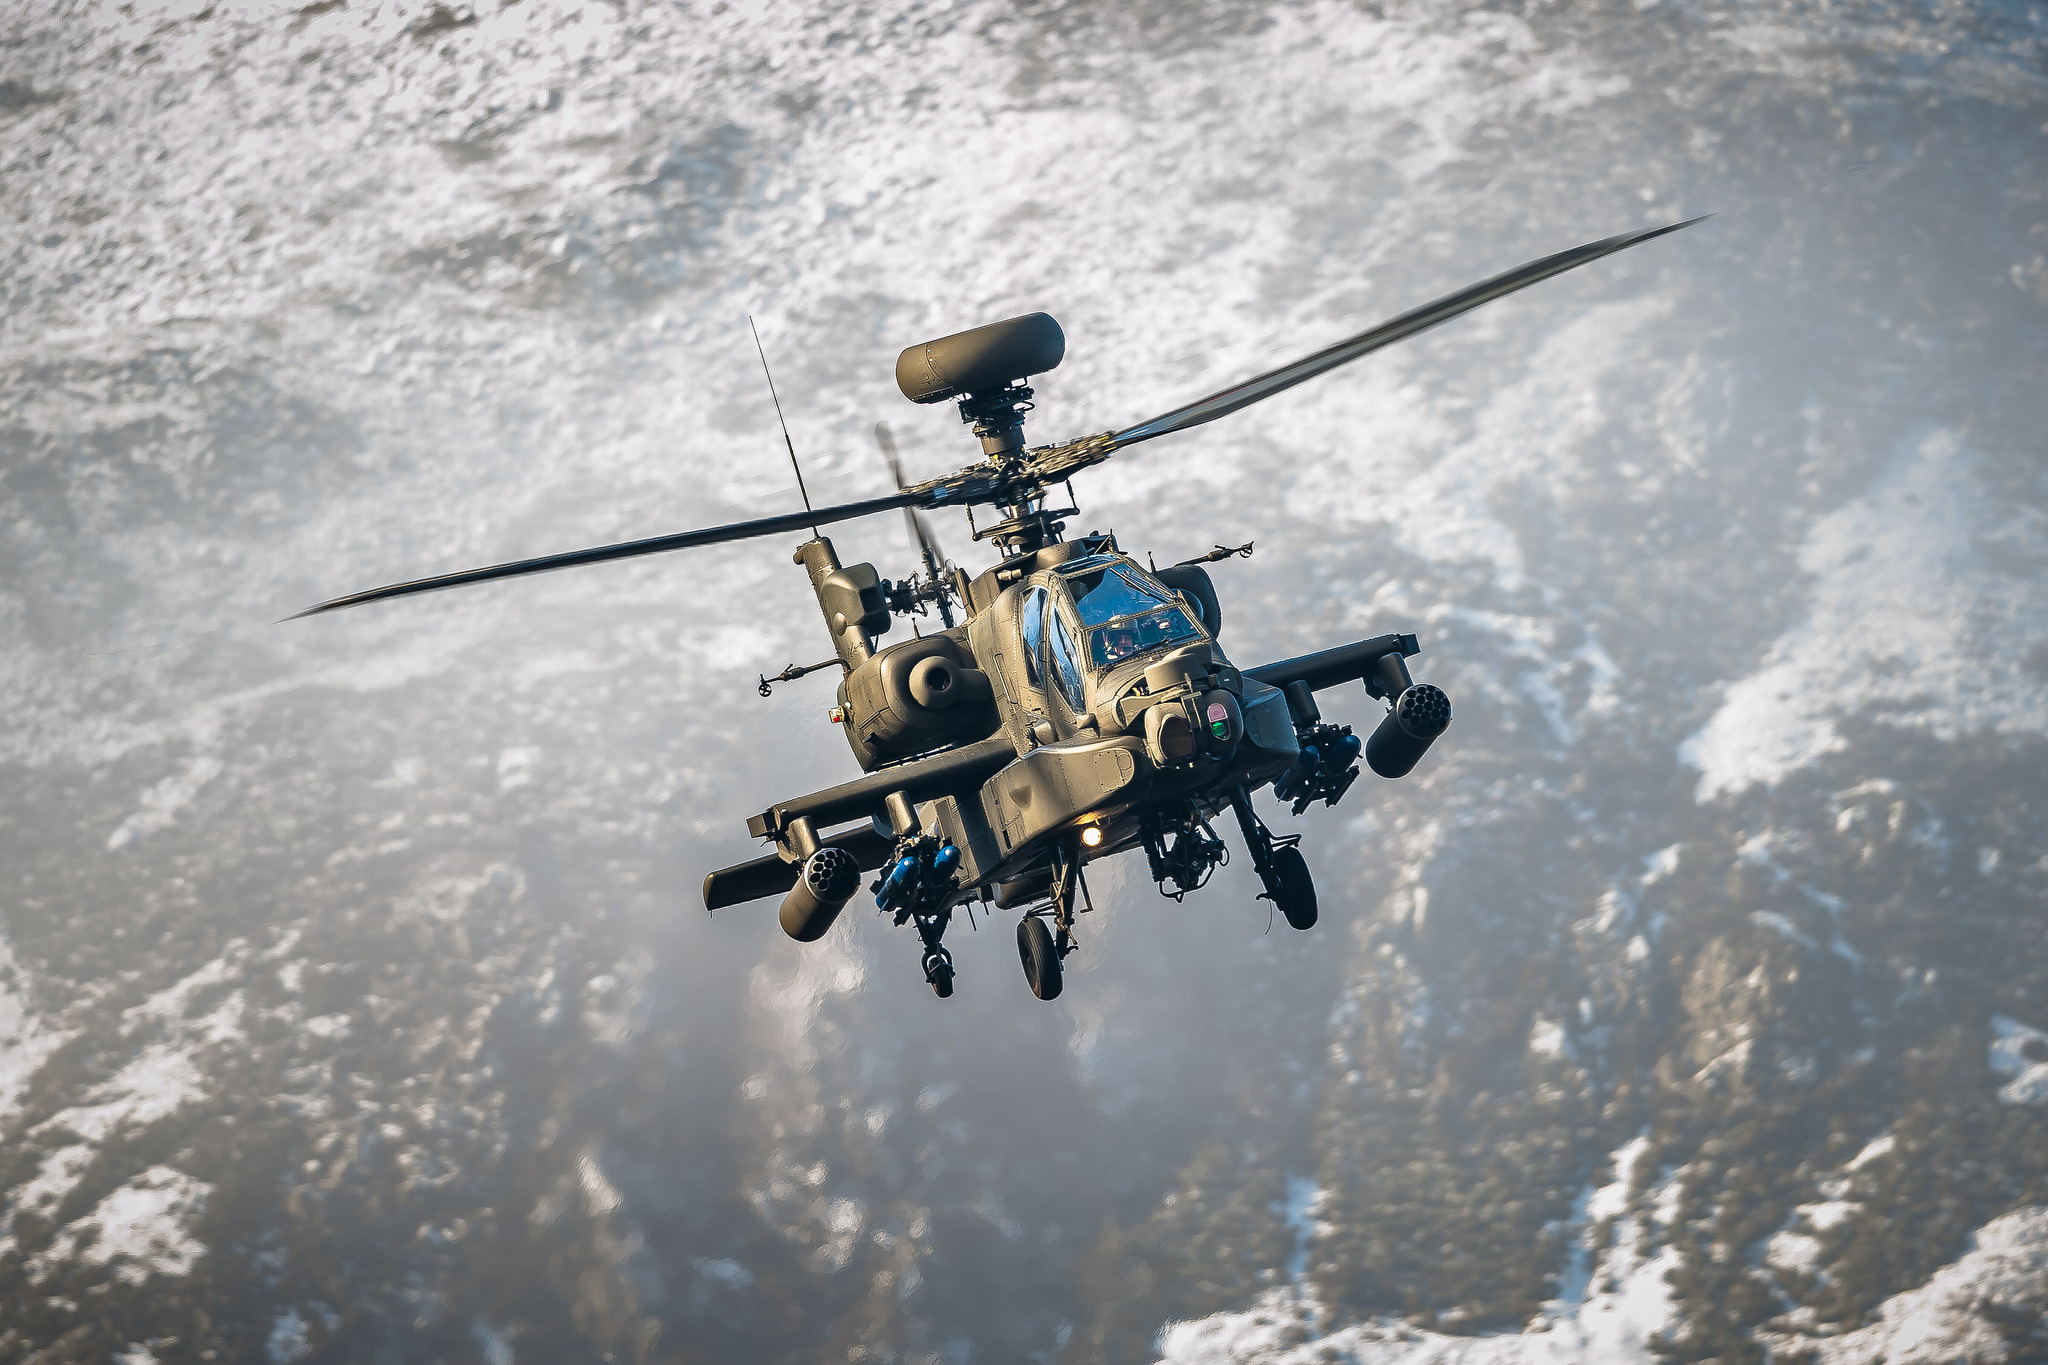 Wallpaper Ah Apache The Drums Helicopter